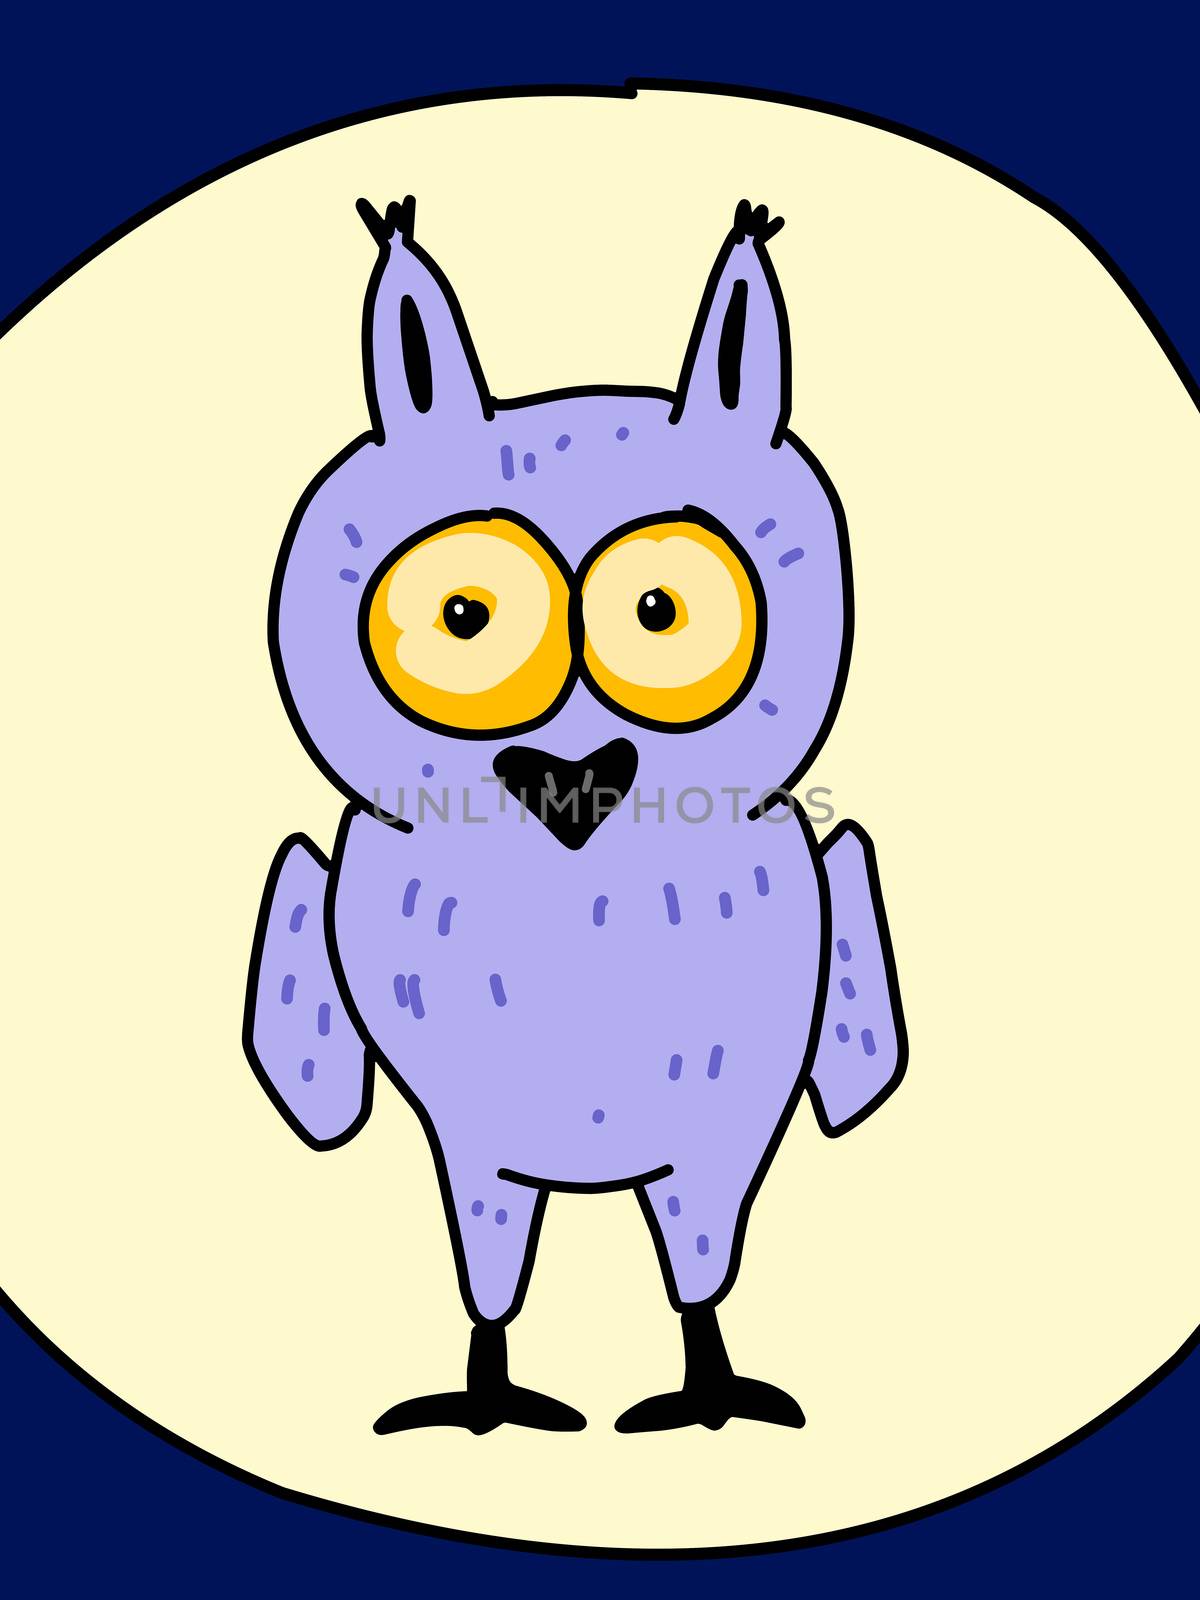 An illustration of a unny comic character little owl full moon